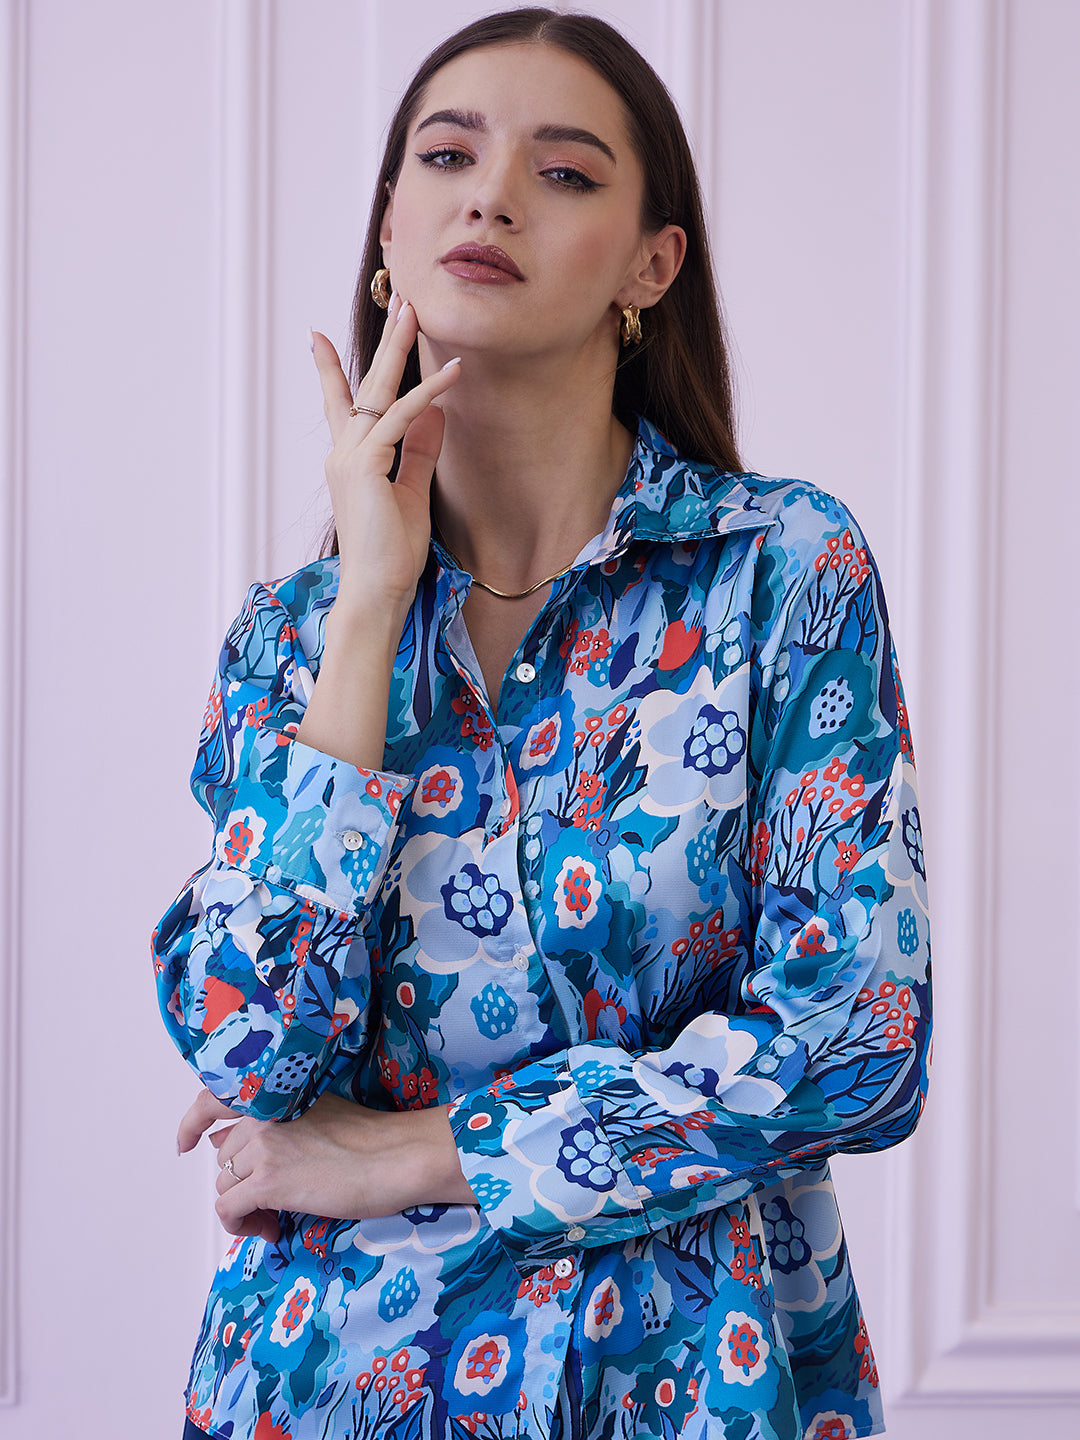 Athena Blue Printed Shirt With Trousers